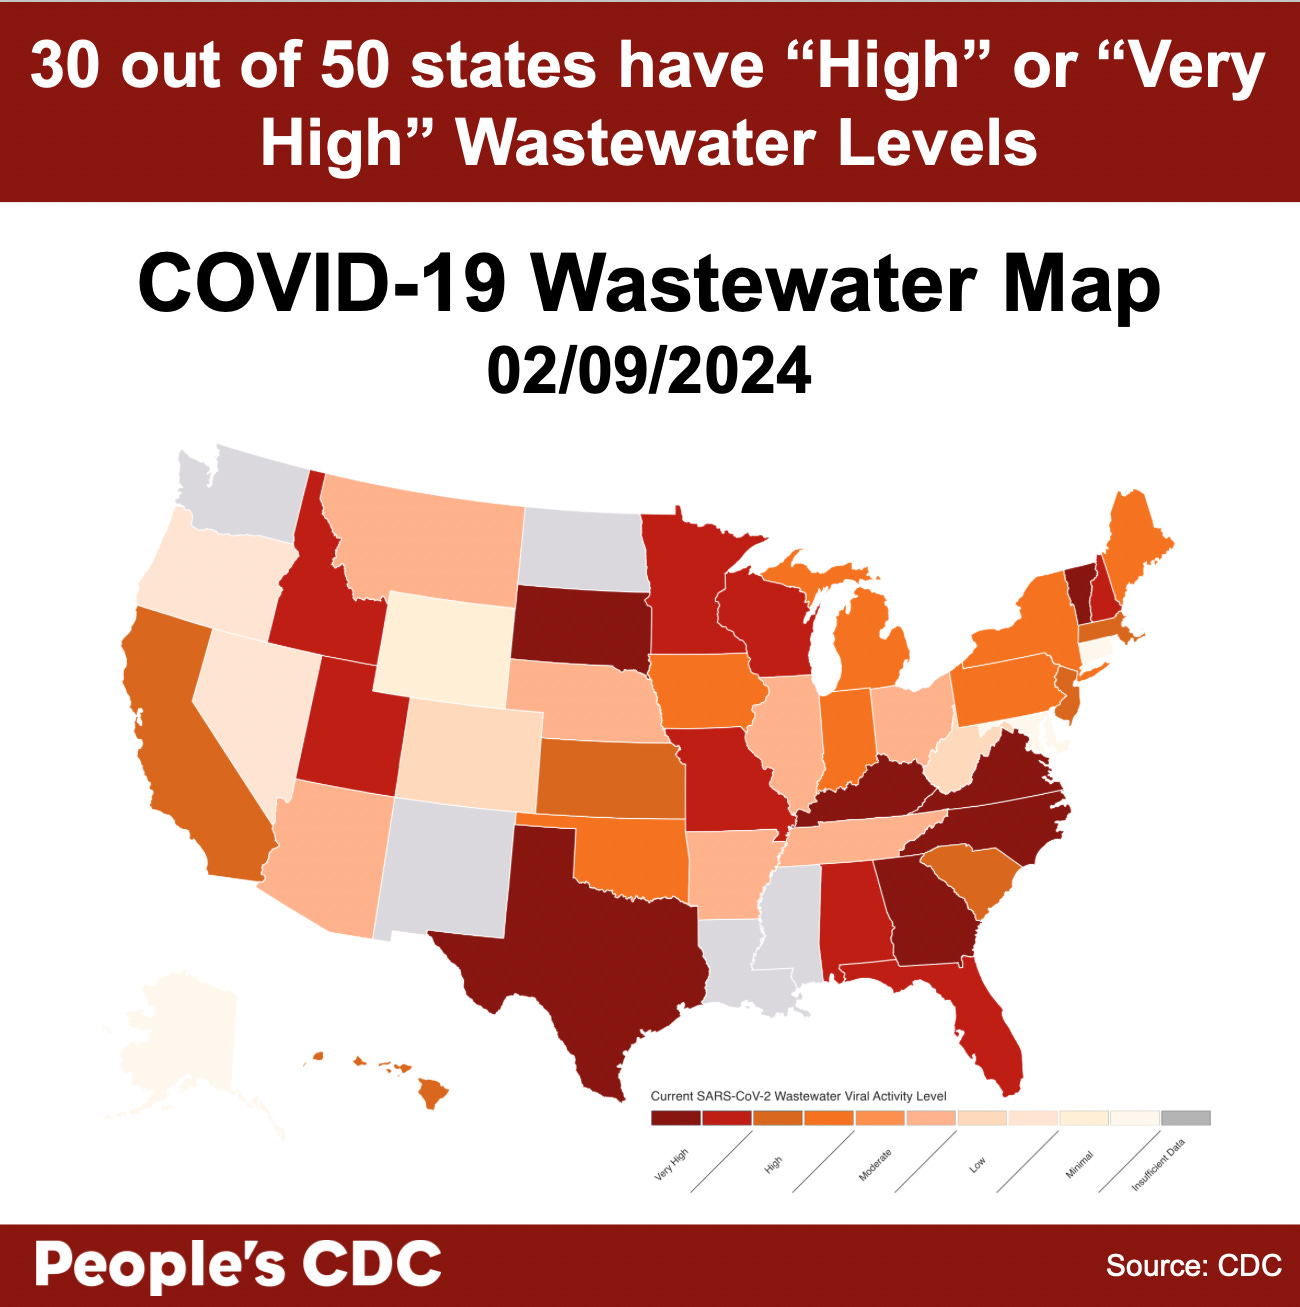 Alt text: A map of the United States color coded in shades of red, orange, and gray displaying SARS-CoV-2 Wastewater Viral Activity level as-of February 9th, 2024 , where deeper tones correlate to higher viral activity and gray indicates insufficient data. Most states display deep red “very high” to orange “high” COVID-19 levels with 5 states, the U.S. Virgin Islands, Puerto Rico and Guam reporting insufficient data. Text on map reads “30 out of 50 states and territories have High or Very High Wastewater Levels. Covid-19 Wastewater Map 2/9/2024. People’s CDC. Source: CDC.”